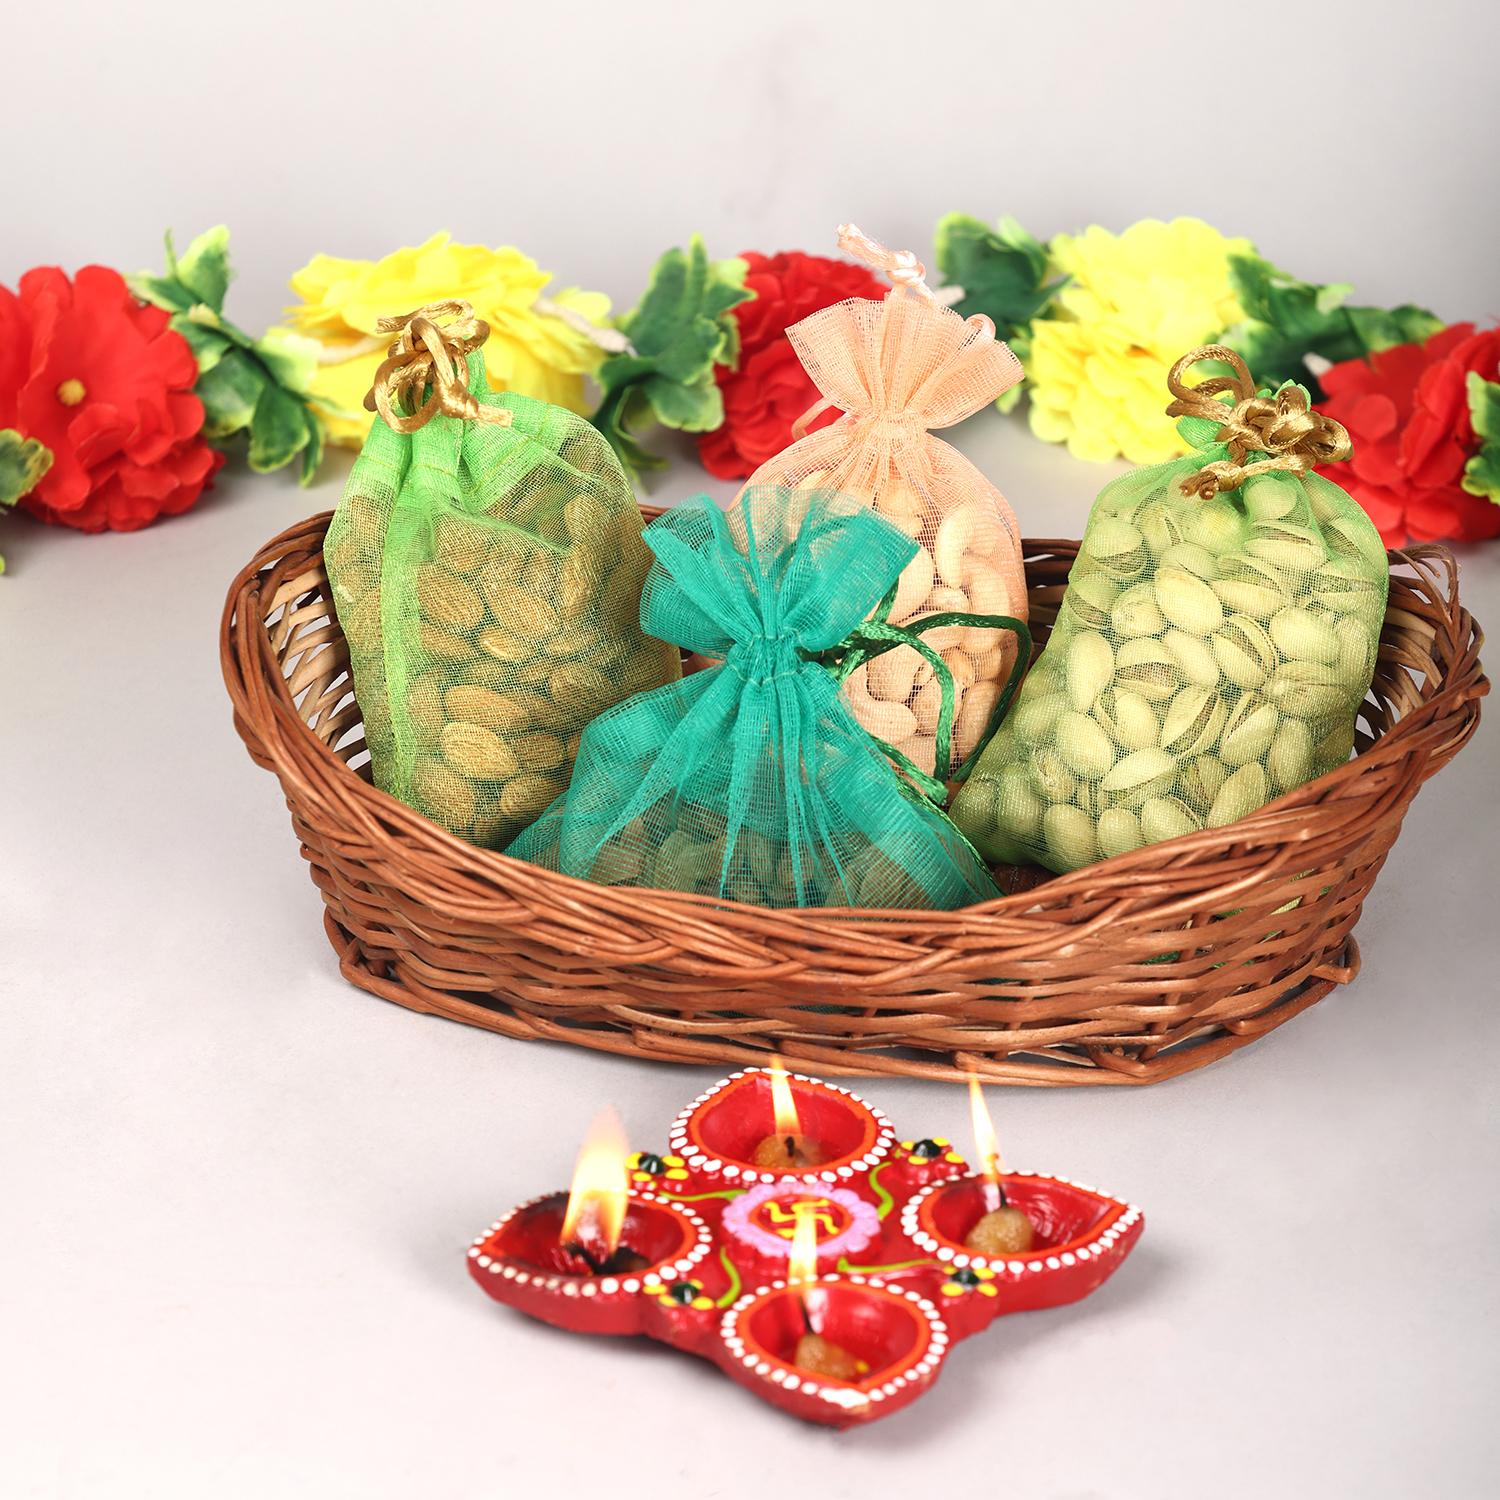 Dry Fruits gifts ideas for rakhi? - FoodNutra